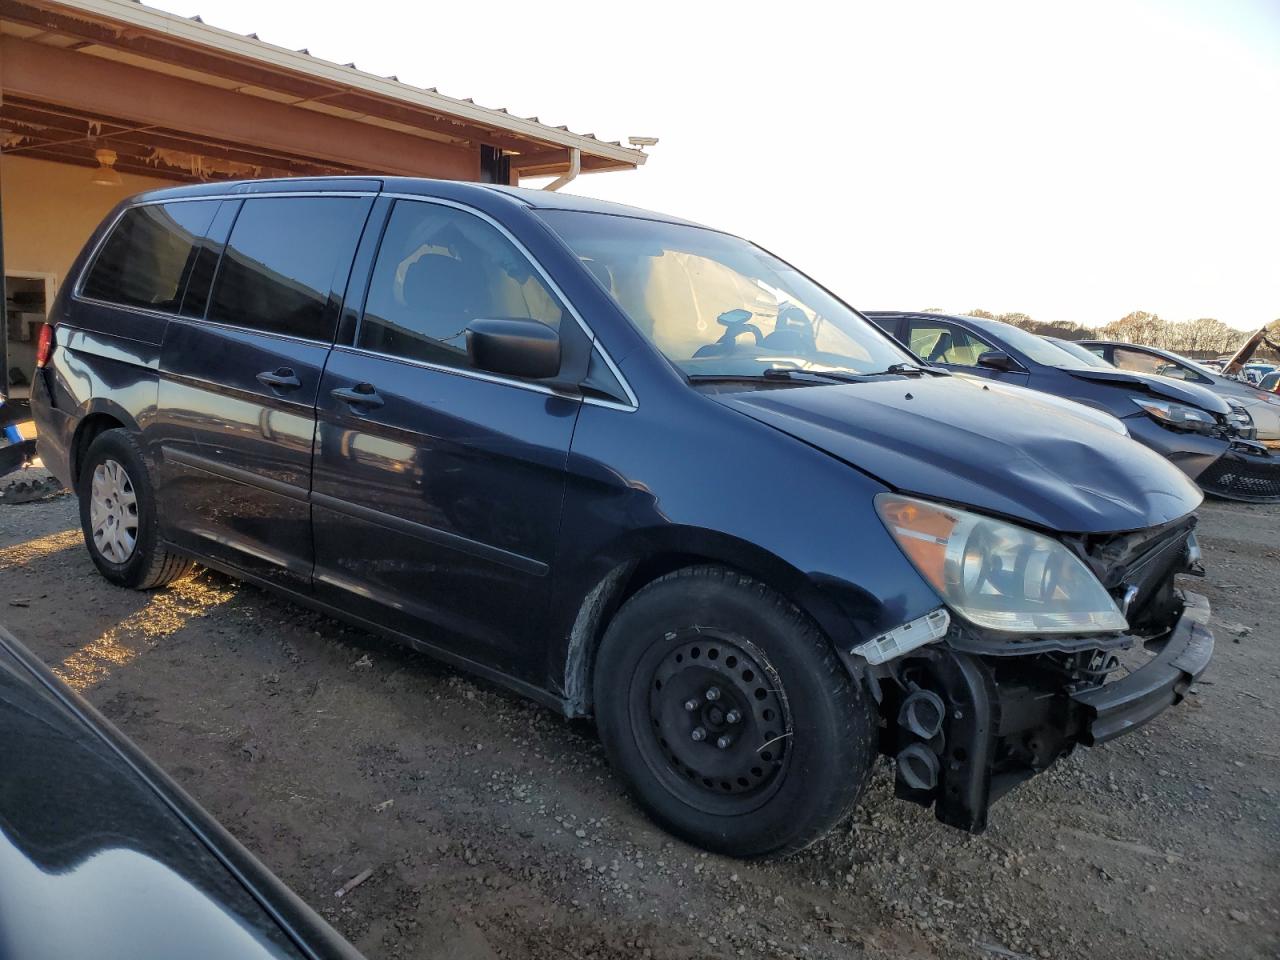 5FNRL38298B****** Salvage and Wrecked 2008 Honda Odyssey in Alabama State